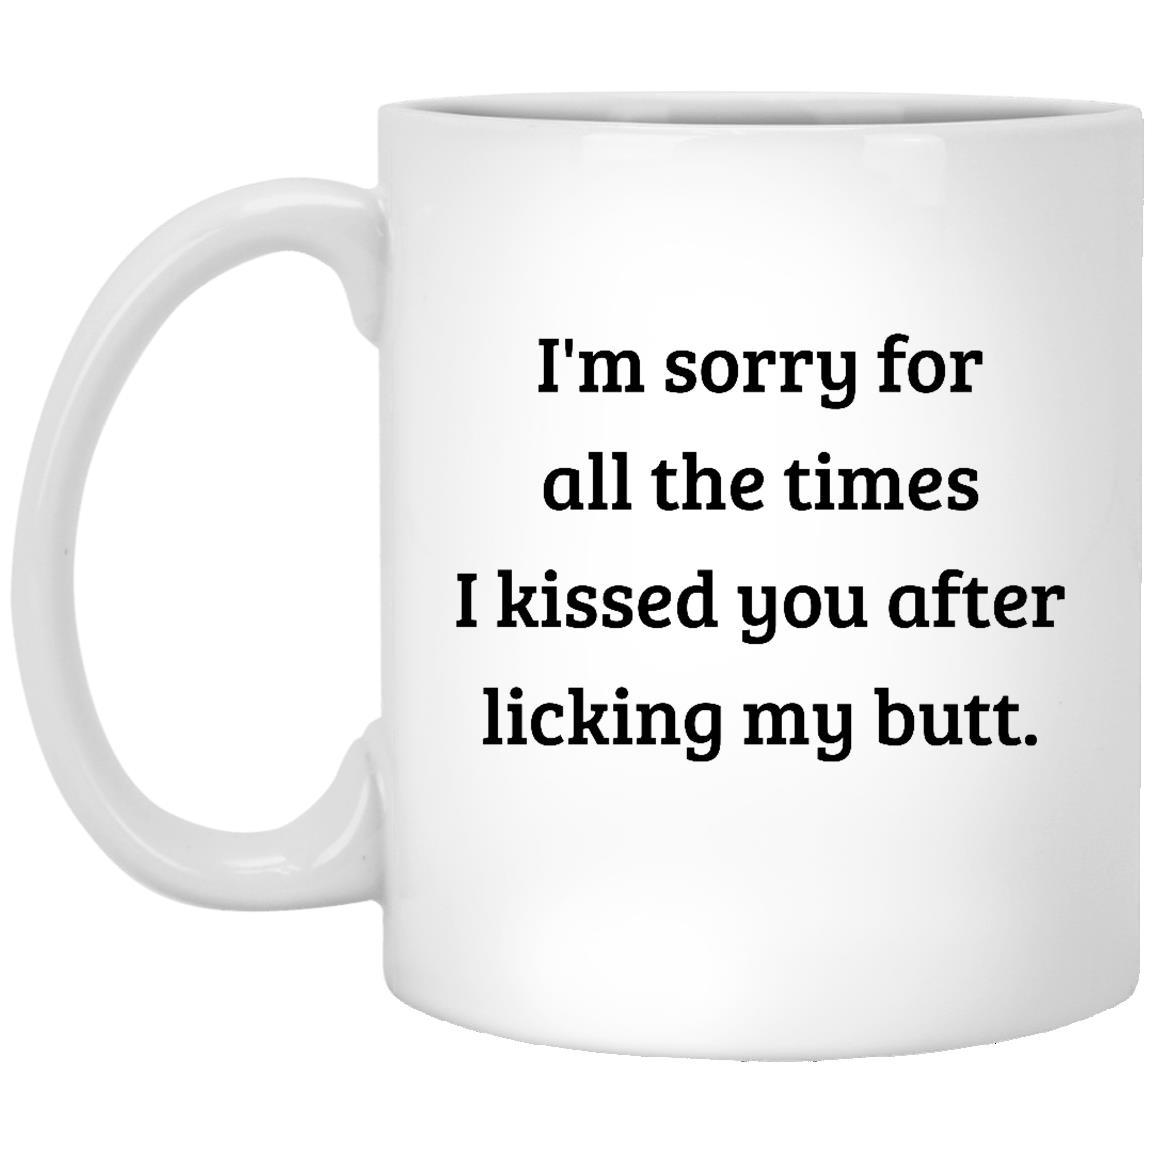 I'm Sorry For All The Times I Kissed You After Licking My Butt Mug